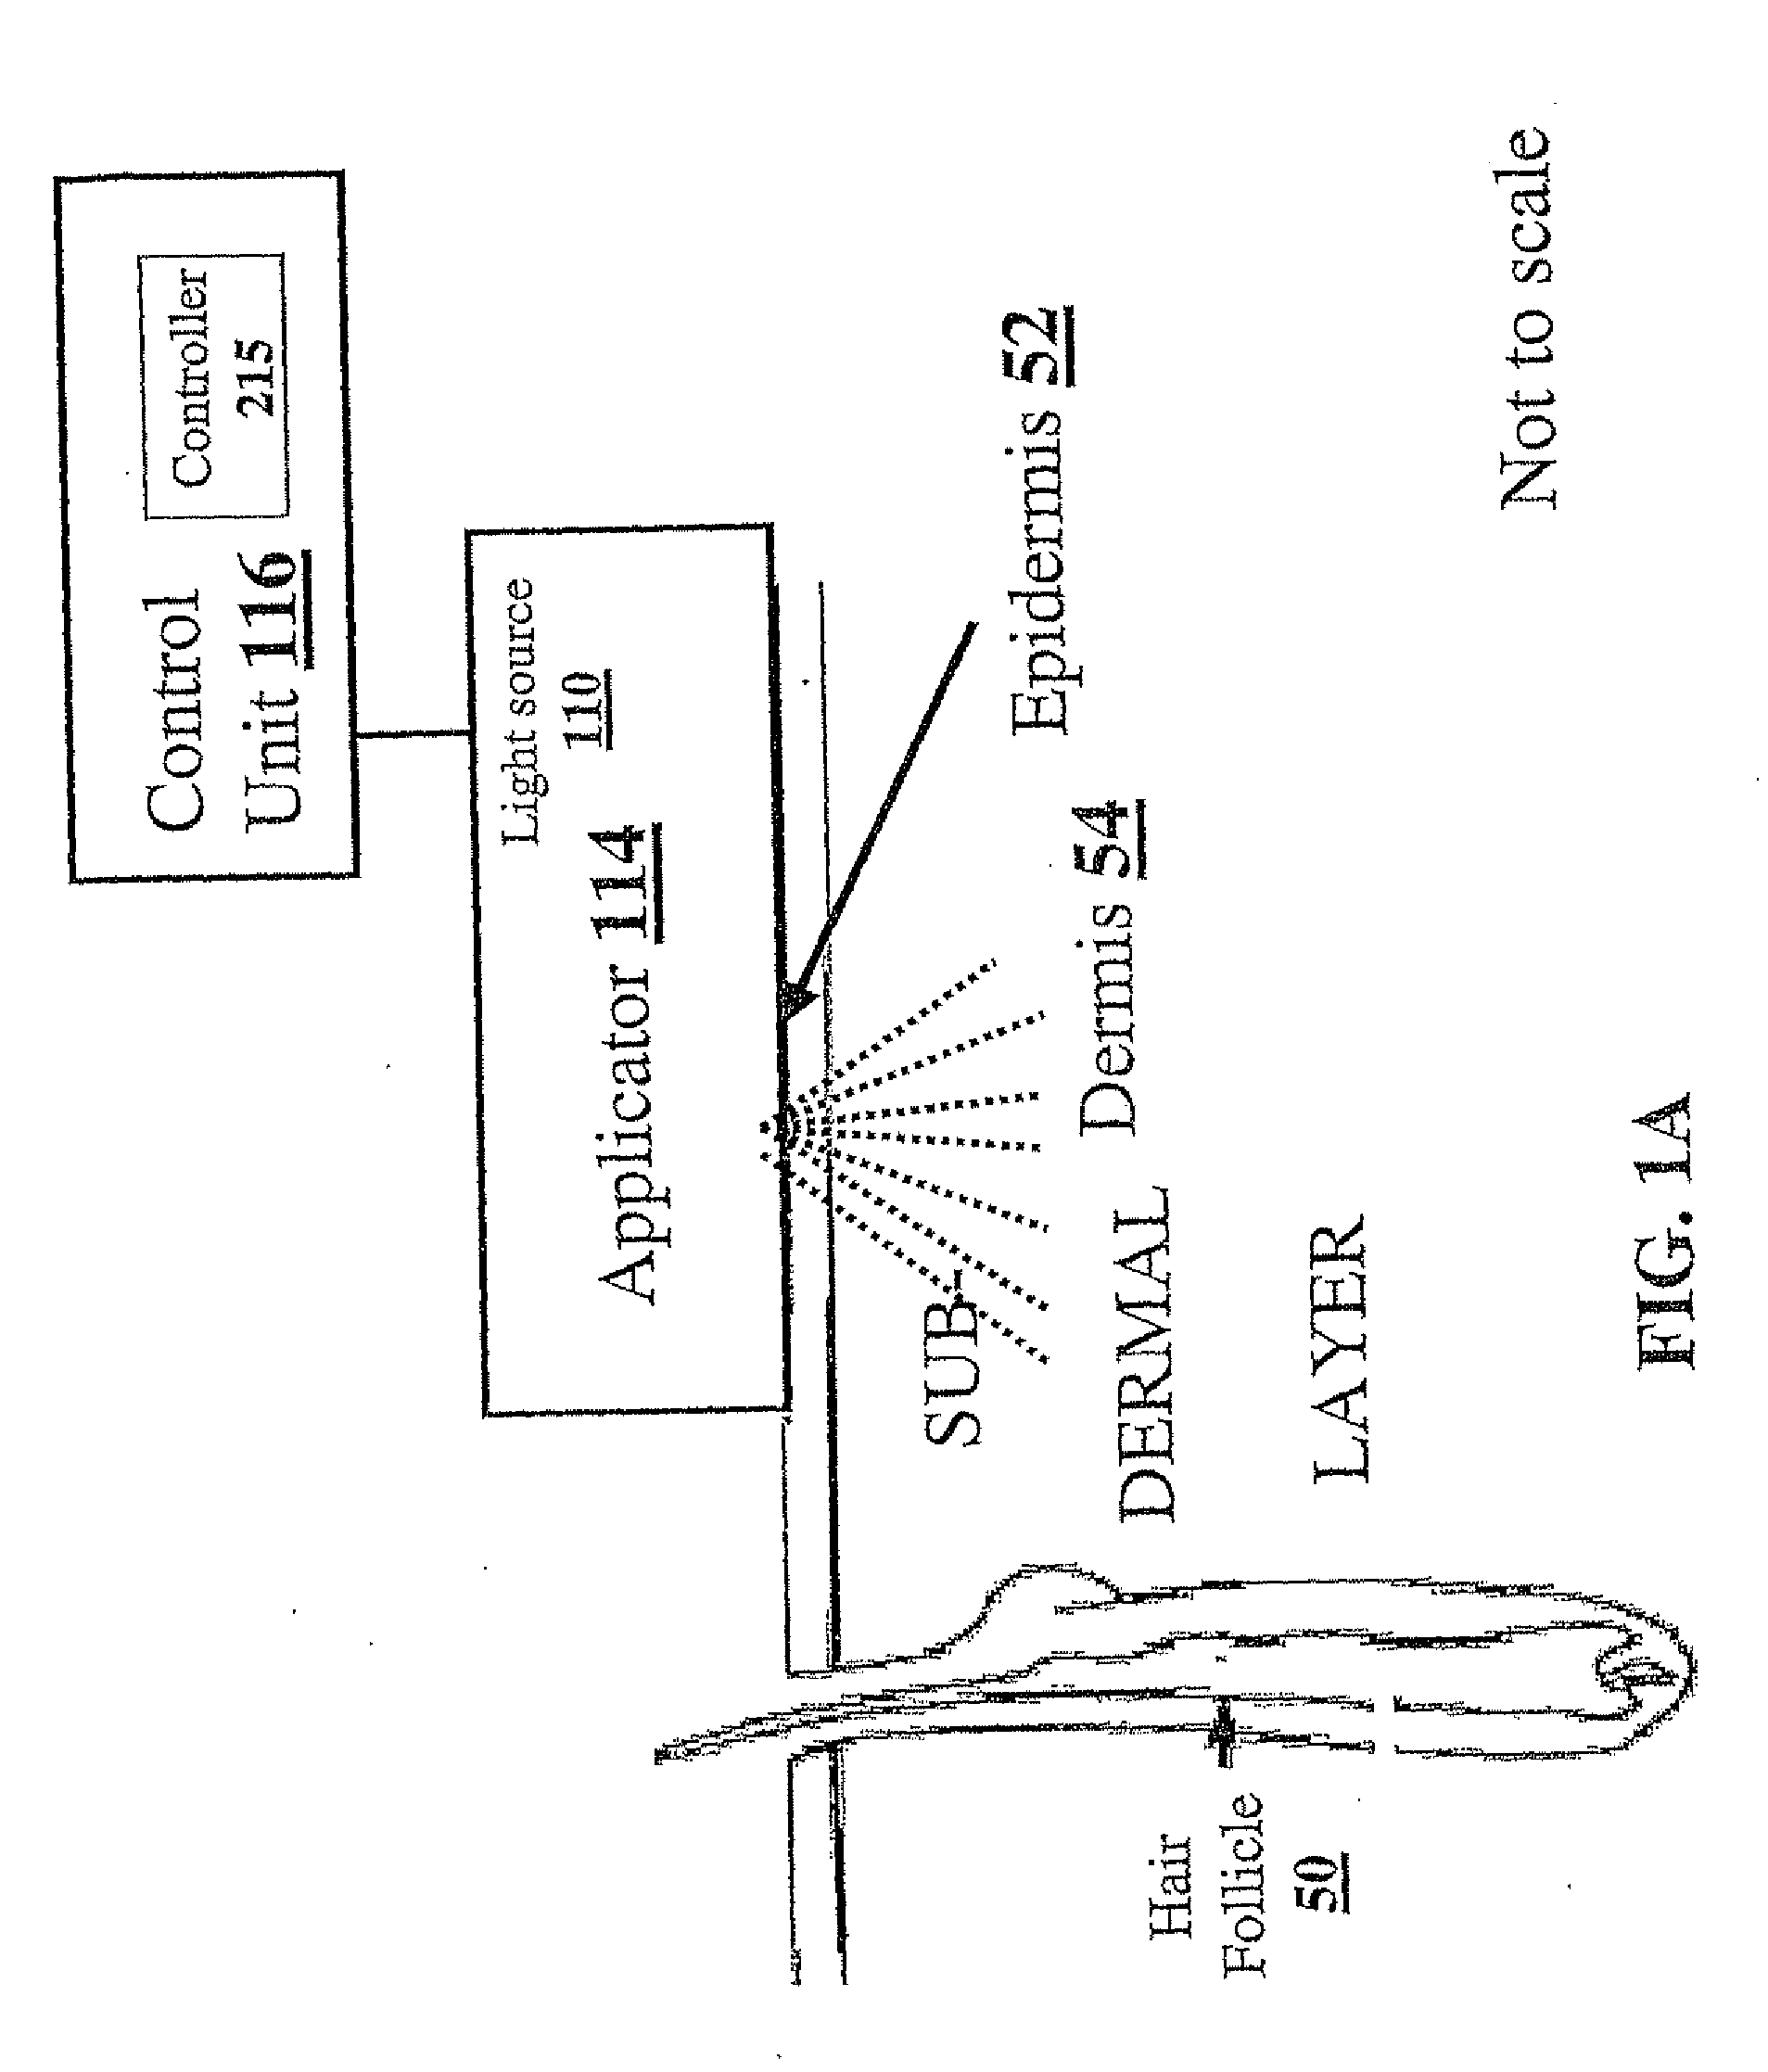 Method and apparatus for light-based hair removal